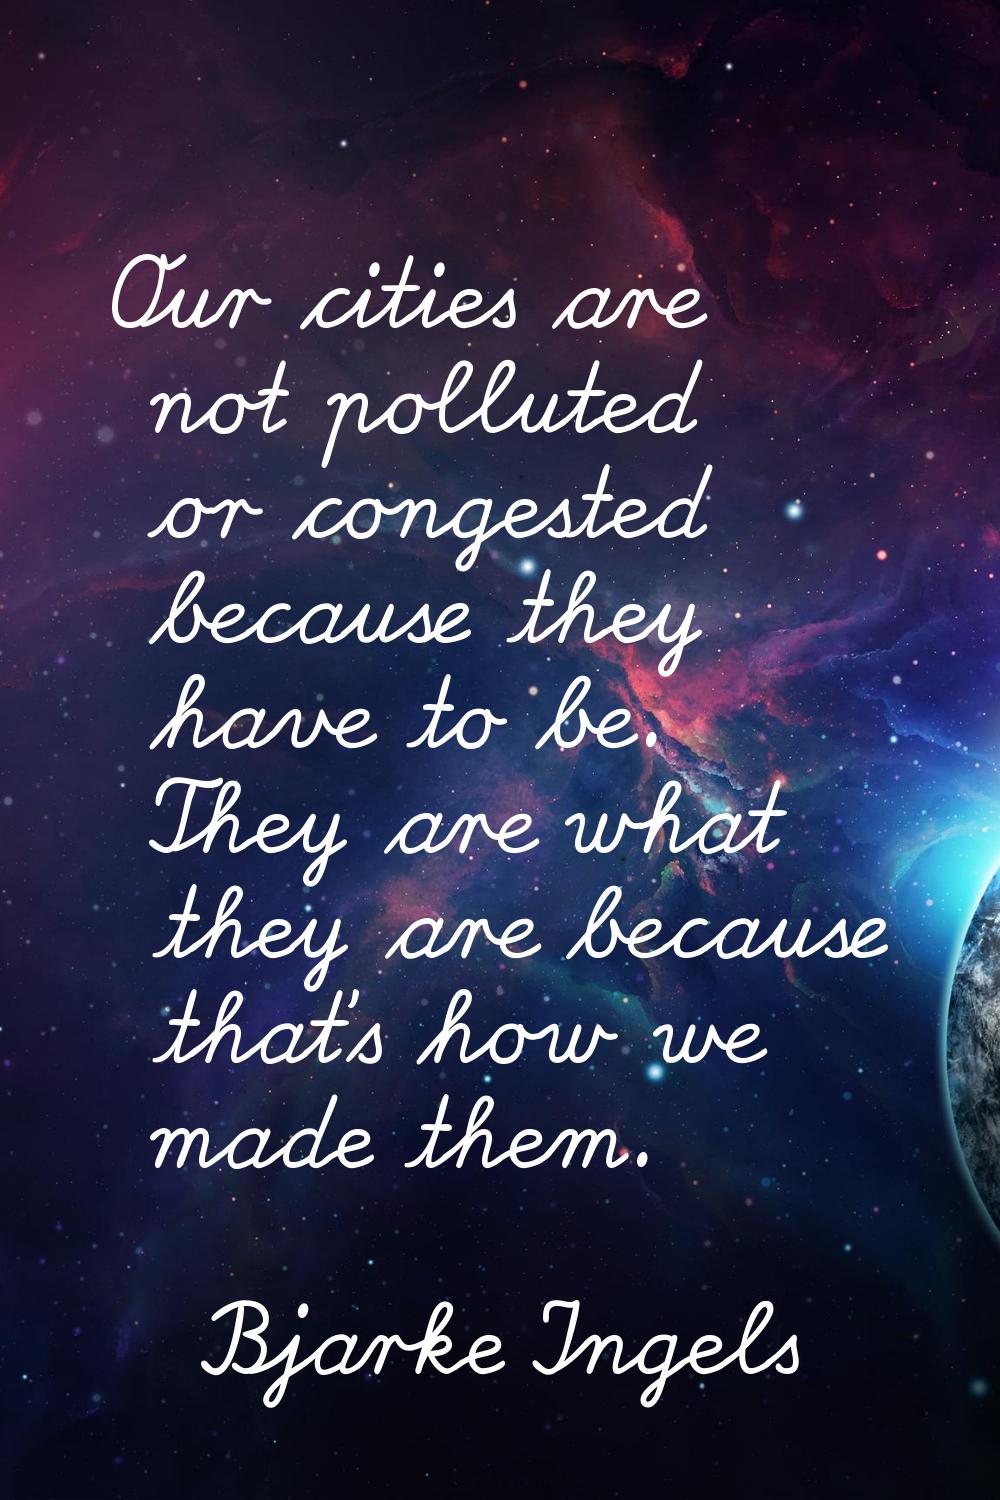 Our cities are not polluted or congested because they have to be. They are what they are because th